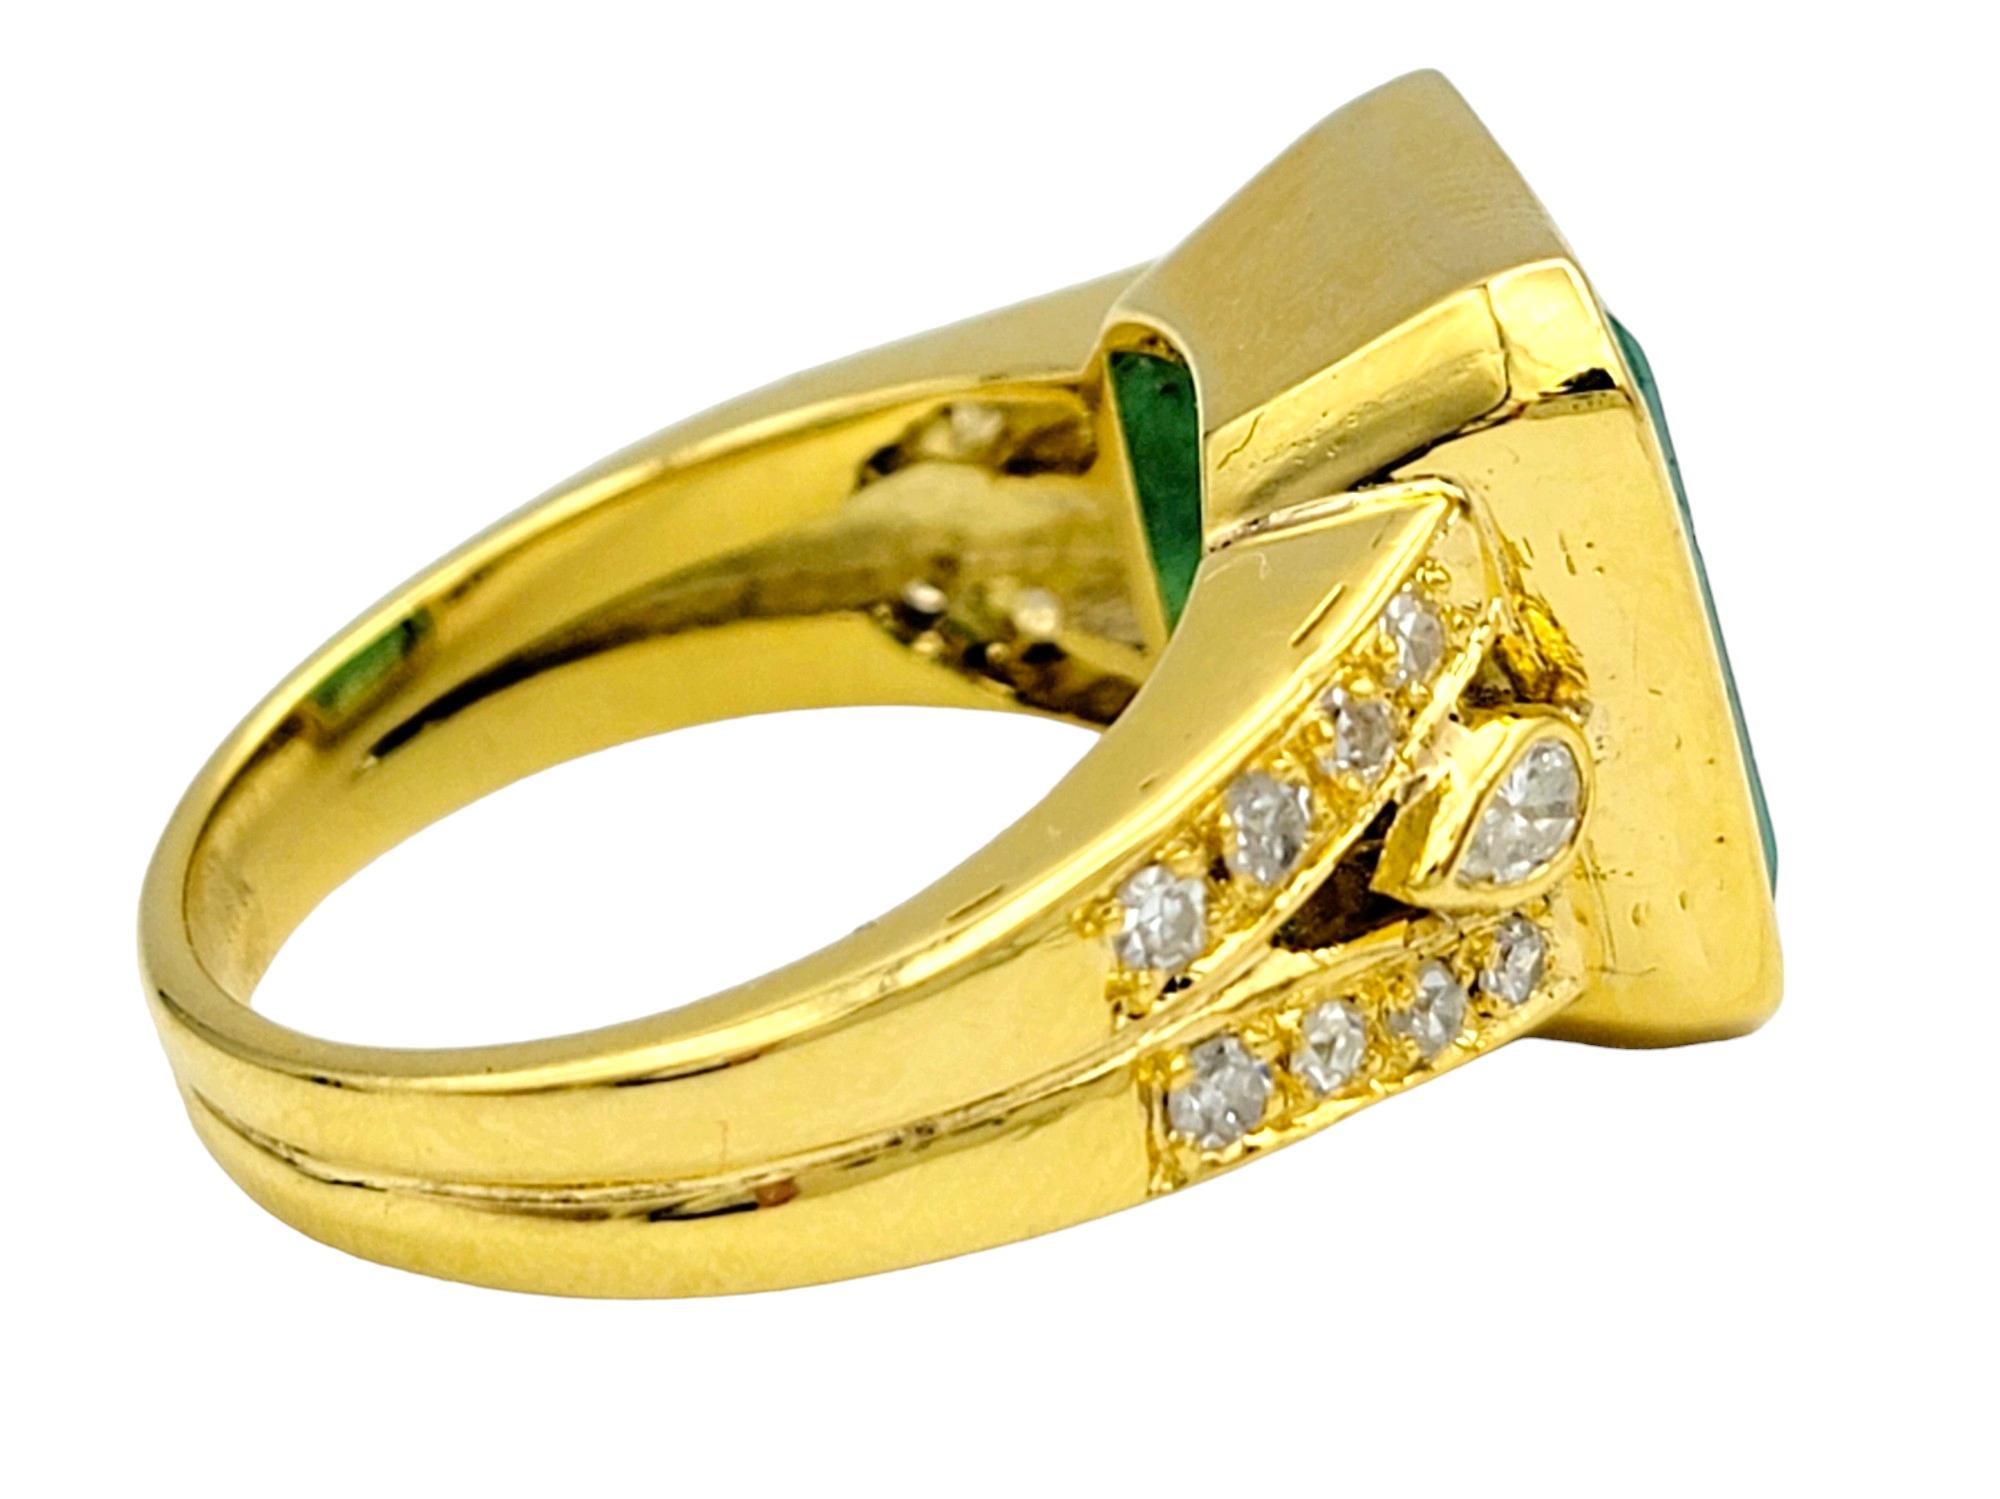 Emerald Cut Emerald and Diamond Shank Cocktail Ring Set in 18 Karat Yellow Gold In Good Condition For Sale In Scottsdale, AZ